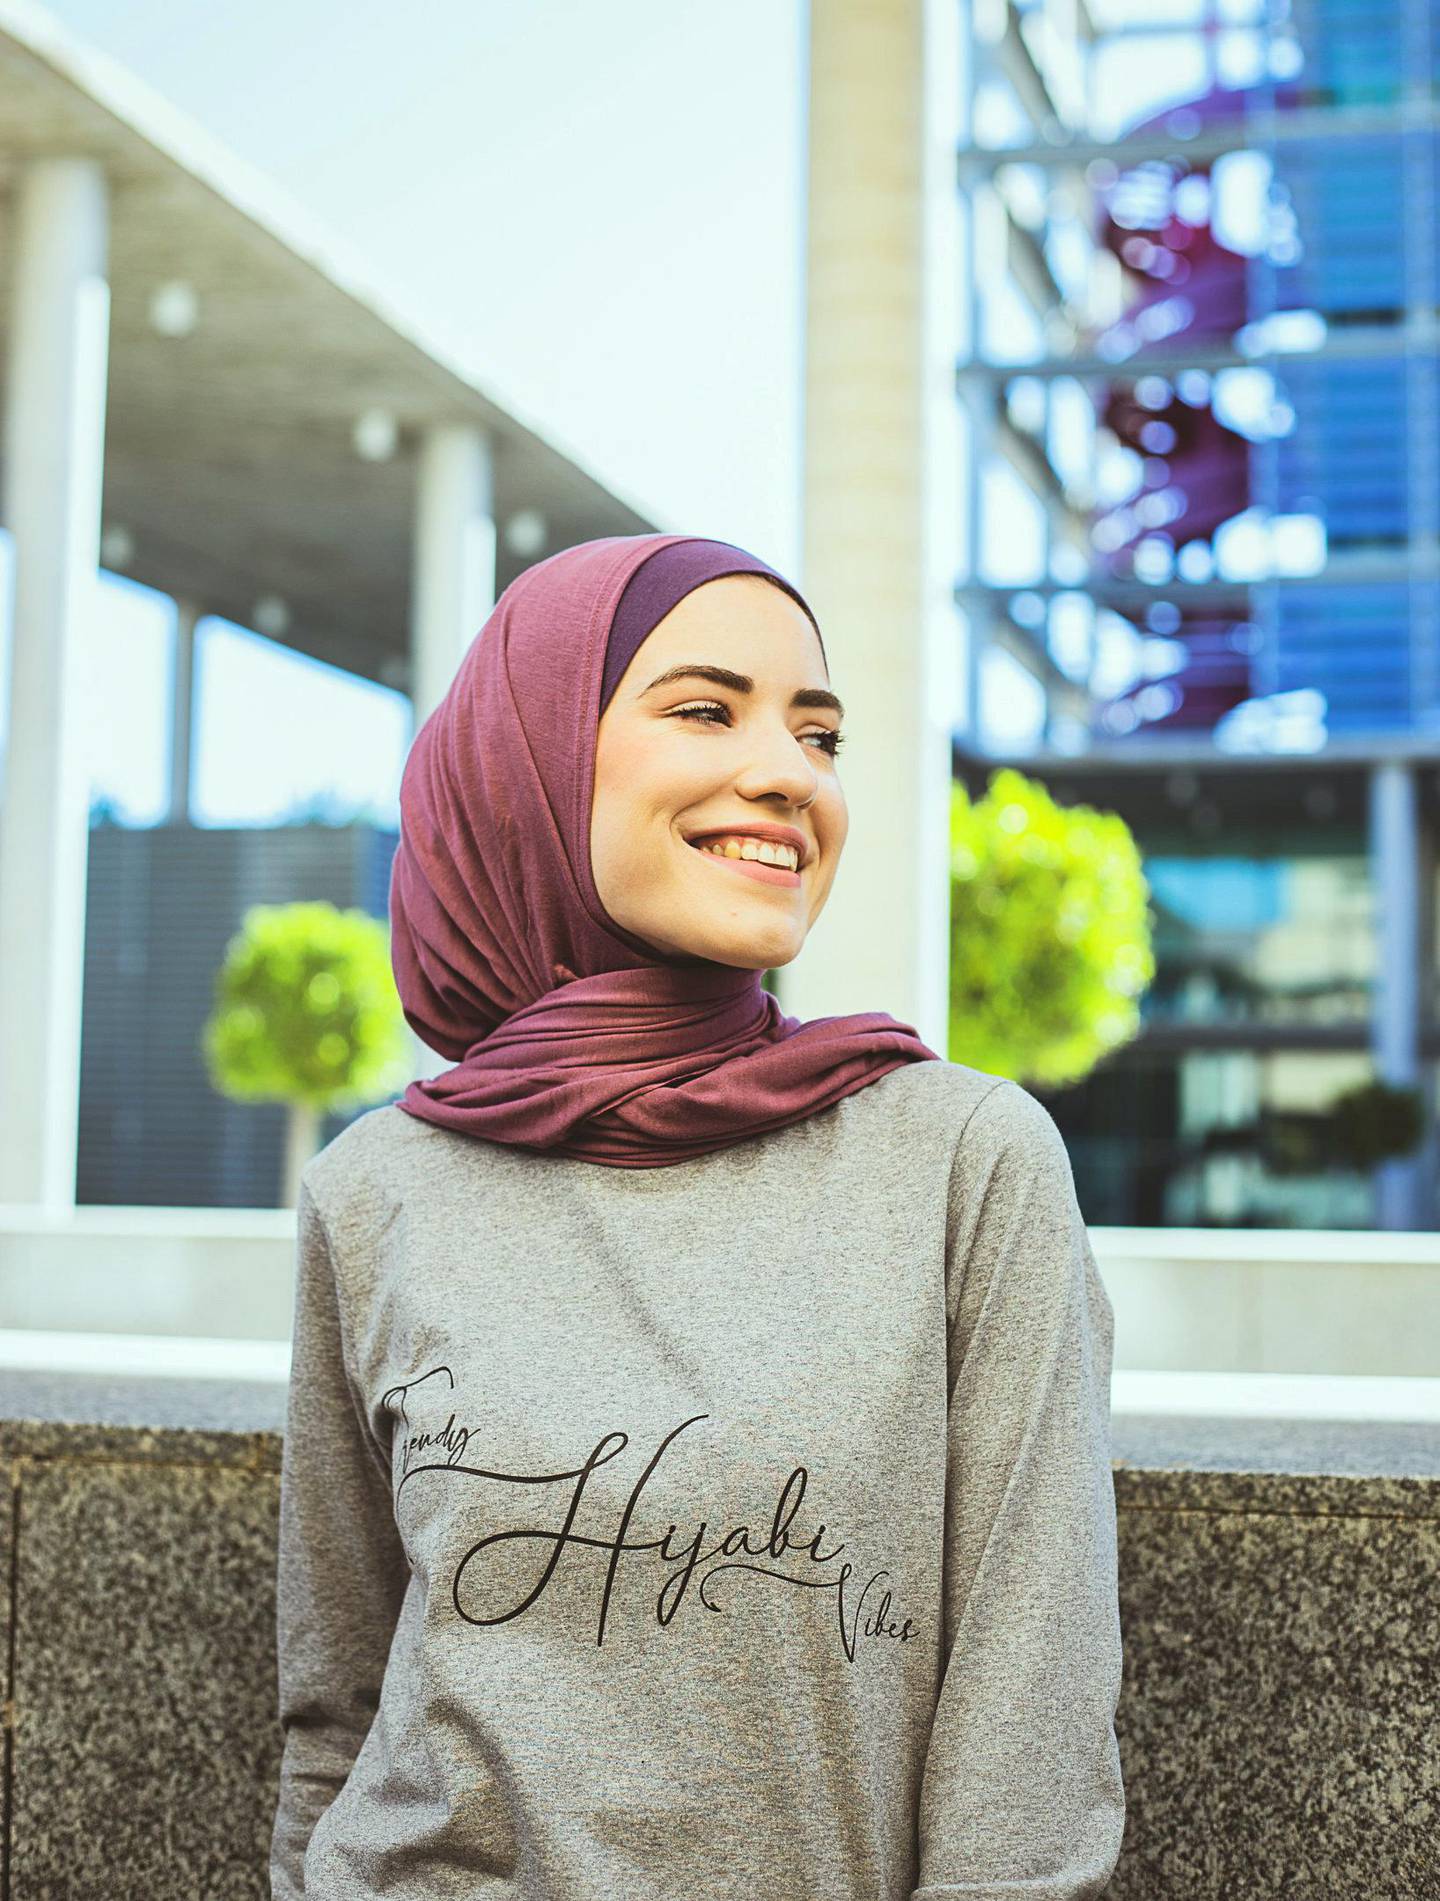 Modest Fitness Week founder Abdiya Iman Meddings, who will launch Moowda, a social network for modest fashion, in 2021 